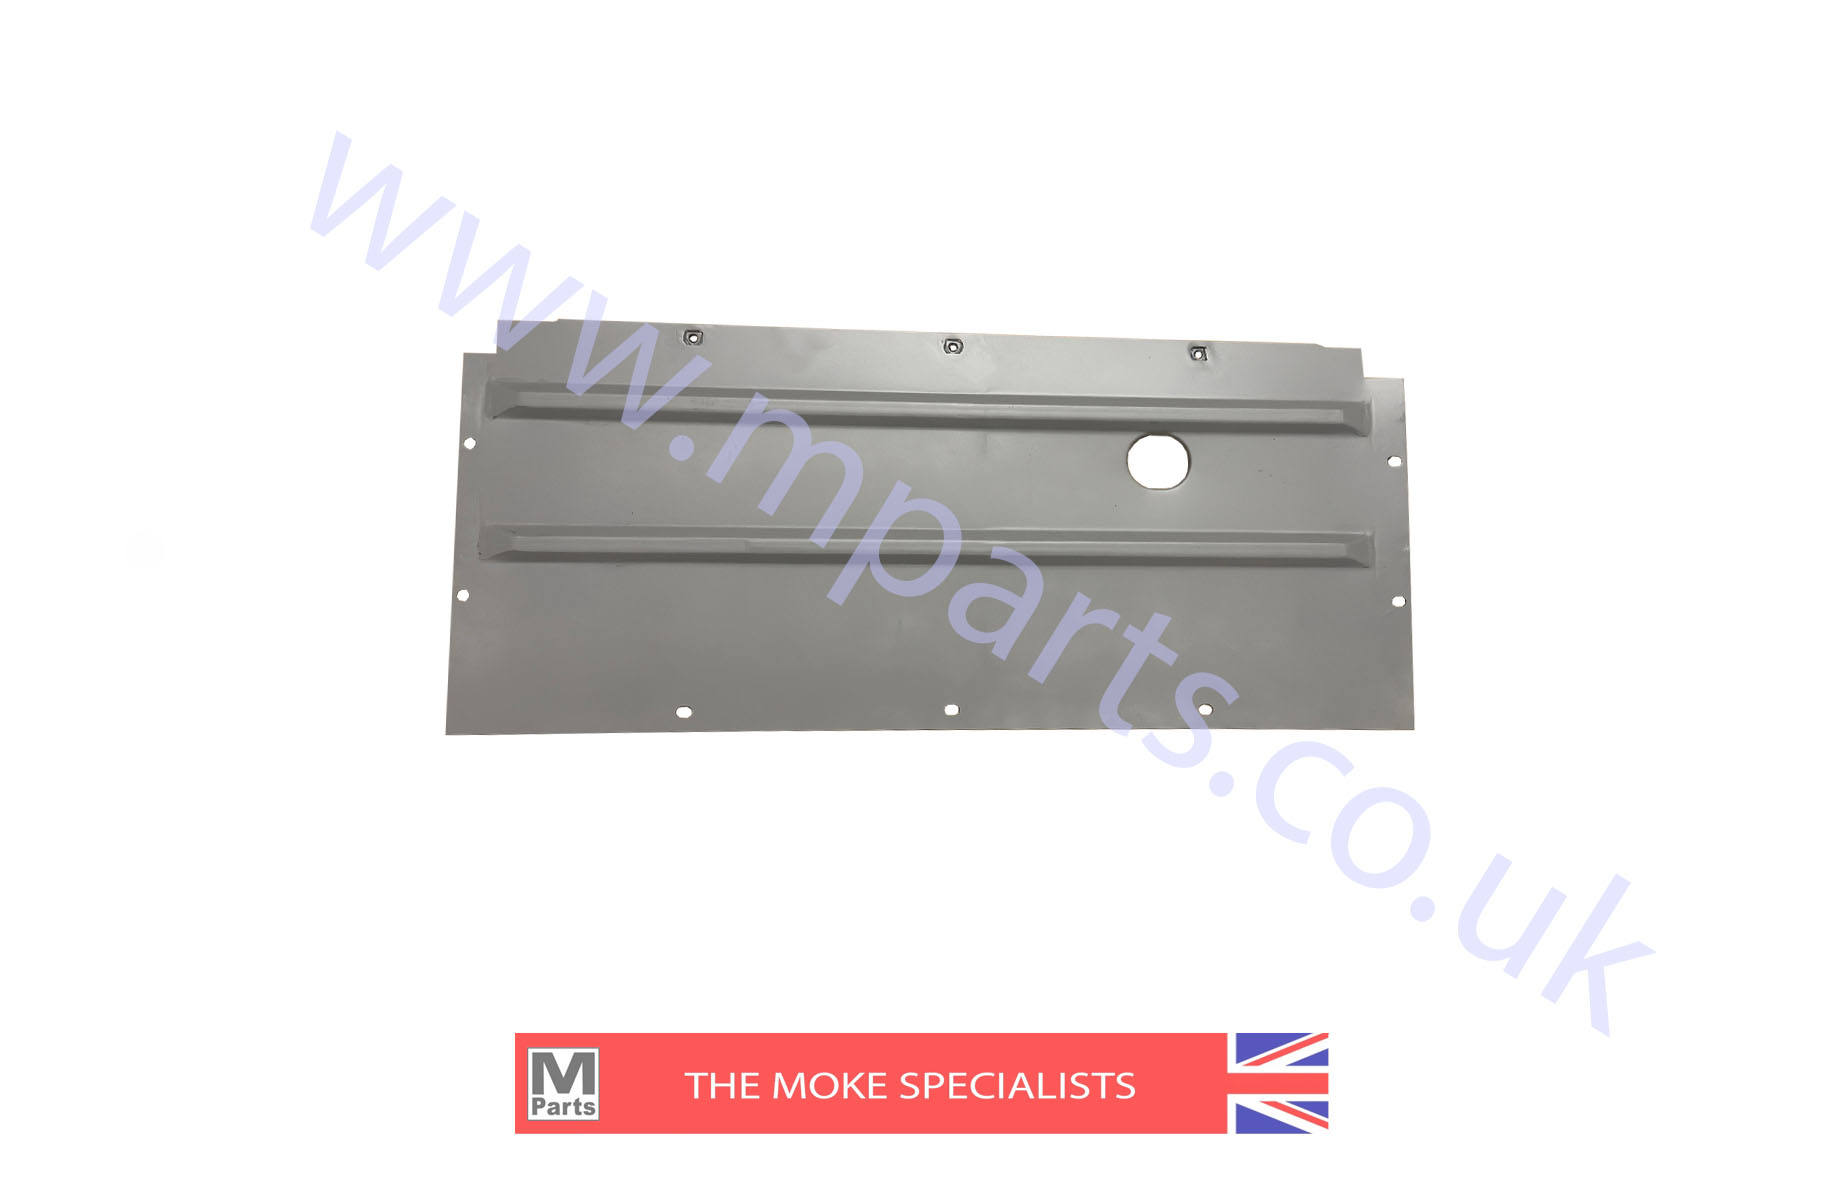 25. Fuel tank protector plate